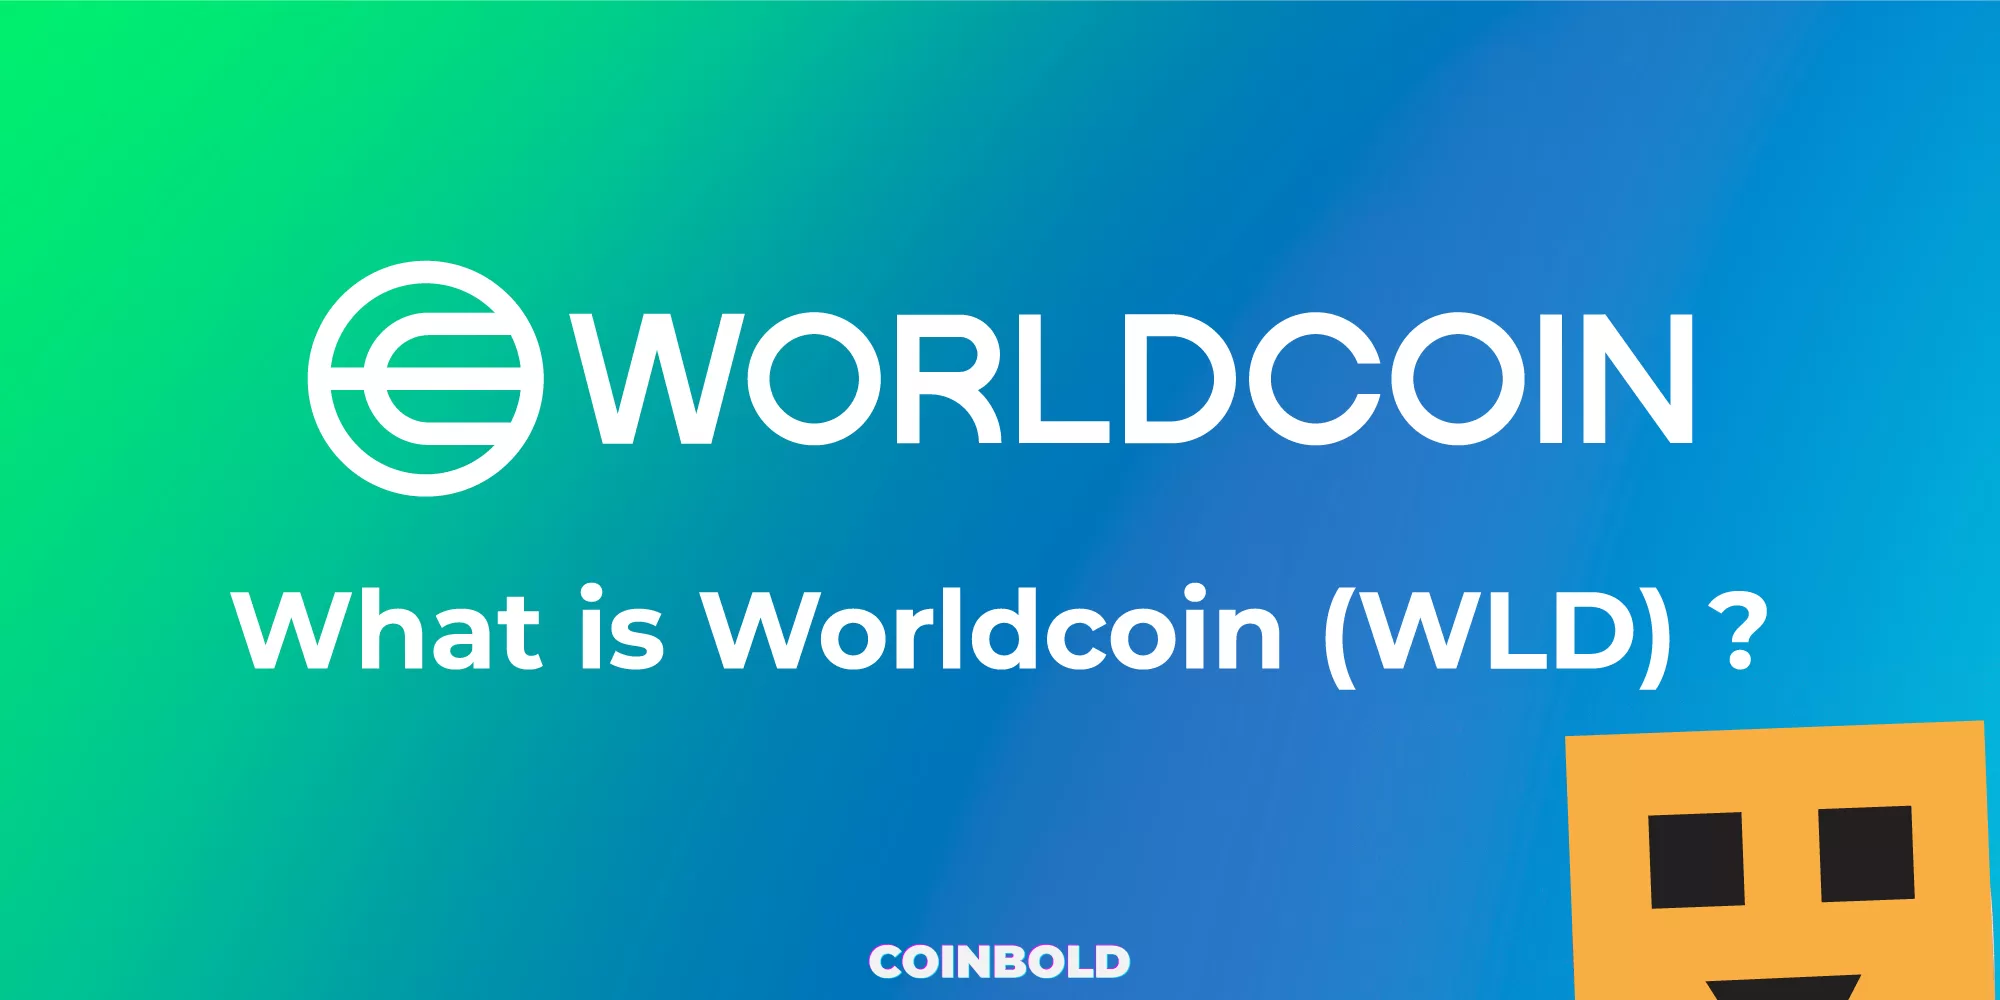 What is Worldcoin (WLD) ?